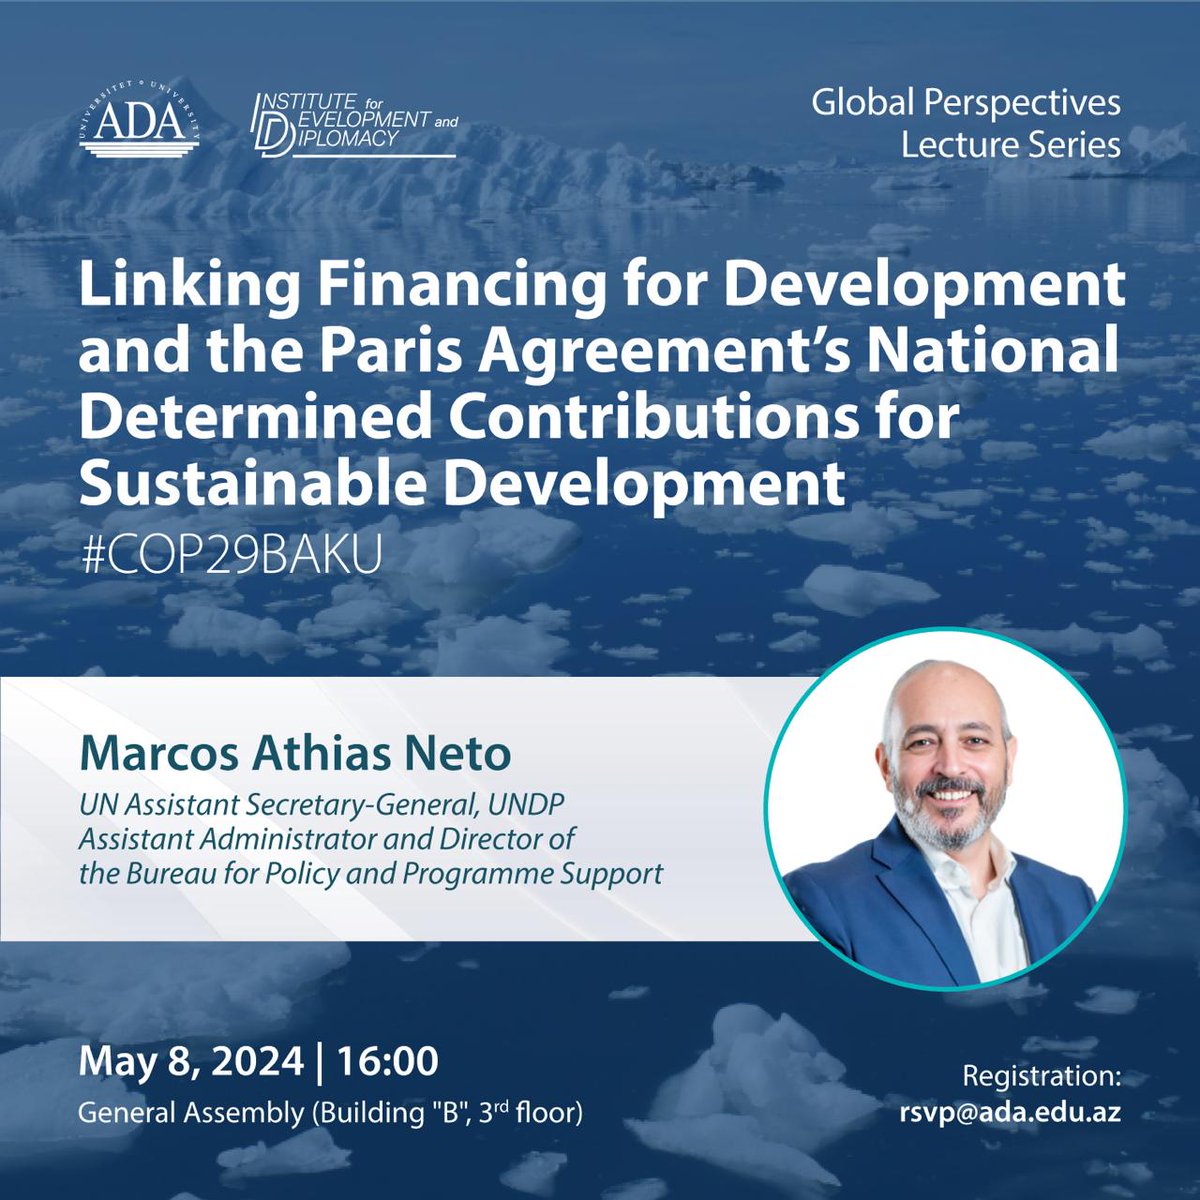 Tomorrow, #UN ASG @UNDP Assistant Administrator & Director of #BPPS @marcosathias will meet with students at @ADAUniversity in Baku. The lecture is titled as “Linking financing for development & the Paris Agreement’s #NationalDeterminedContributions for Sustainable Development.”